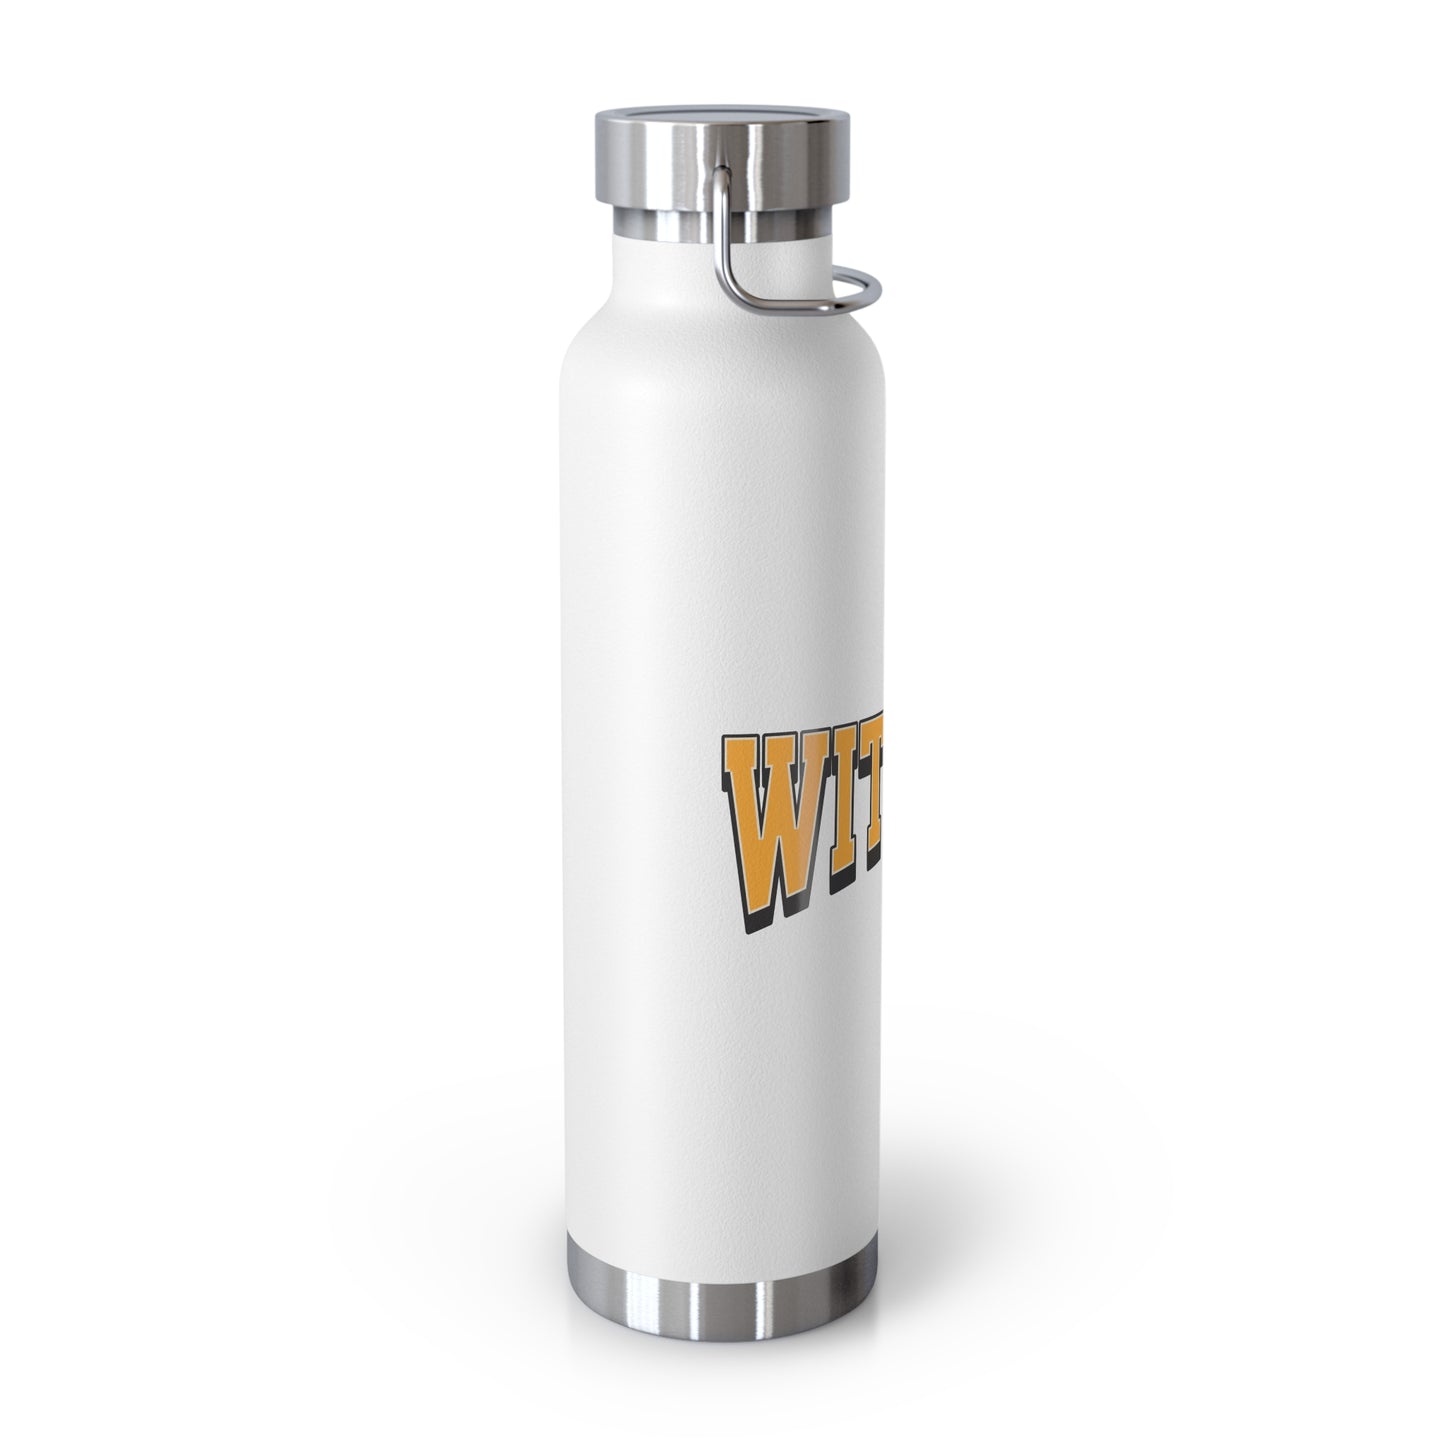 WITNESS Copper Vacuum Insulated Bottle, 22oz